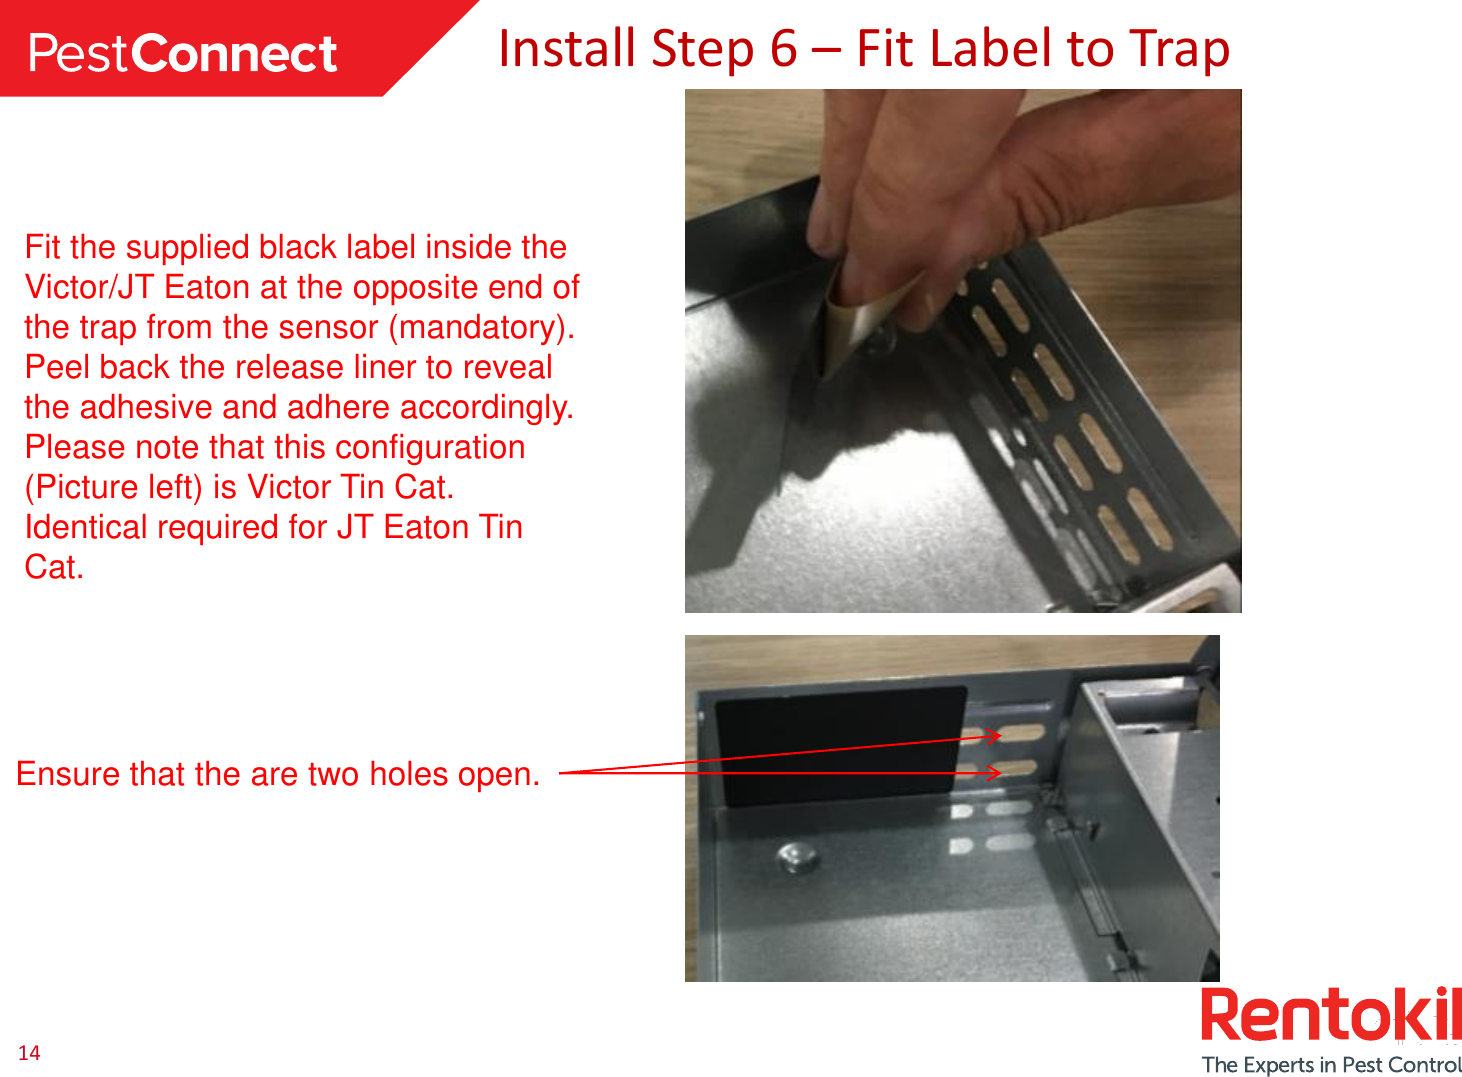 14Install Step 6 –Fit Label to TrapFit the supplied black label inside the Victor/JT Eaton at the opposite end of the trap from the sensor (mandatory).Peel back the release liner to reveal the adhesive and adhere accordingly.Please note that this configuration (Picture left) is Victor Tin Cat.Identical required for JT Eaton Tin Cat. Ensure that the are two holes open.